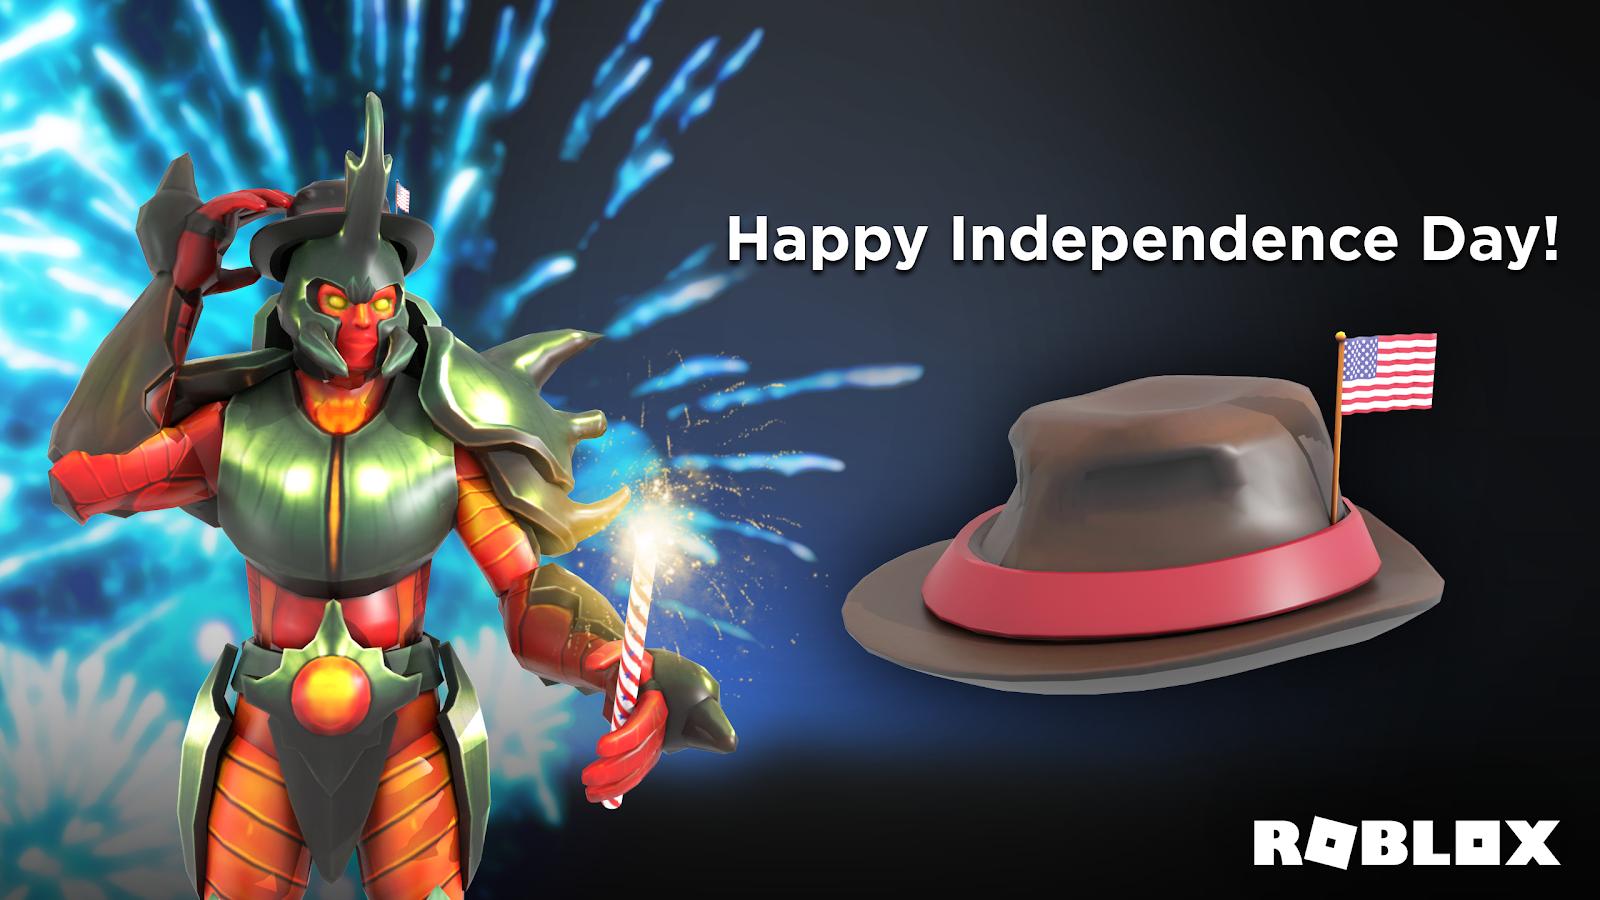 Roblox On Twitter Fire Up The Bbq Get Out The Sparklers - 